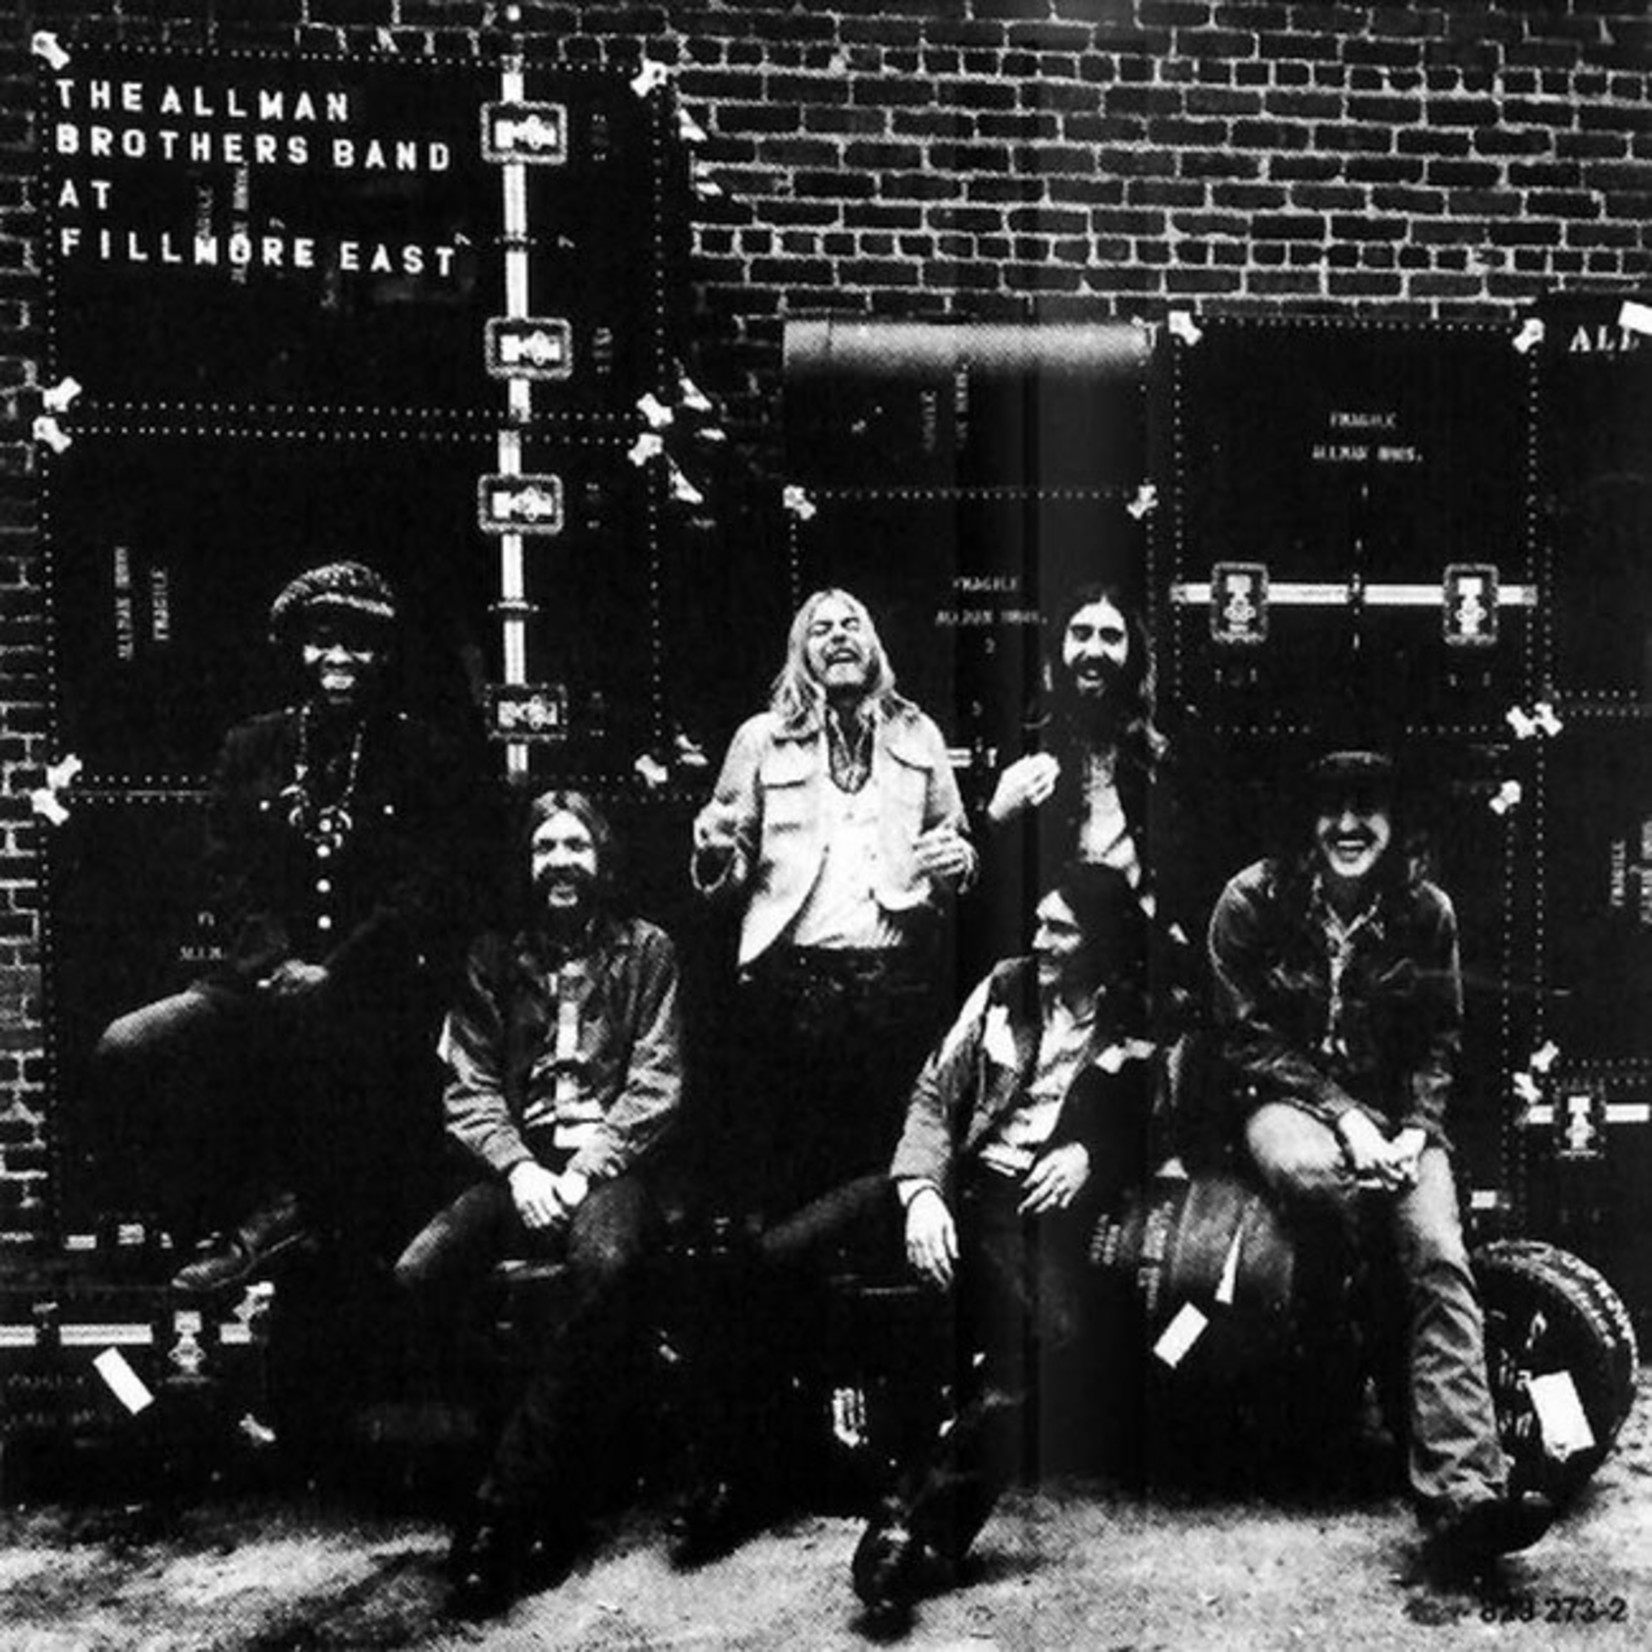 [New] Allman Brothers Band - Live at the Fillmore East (2LP)